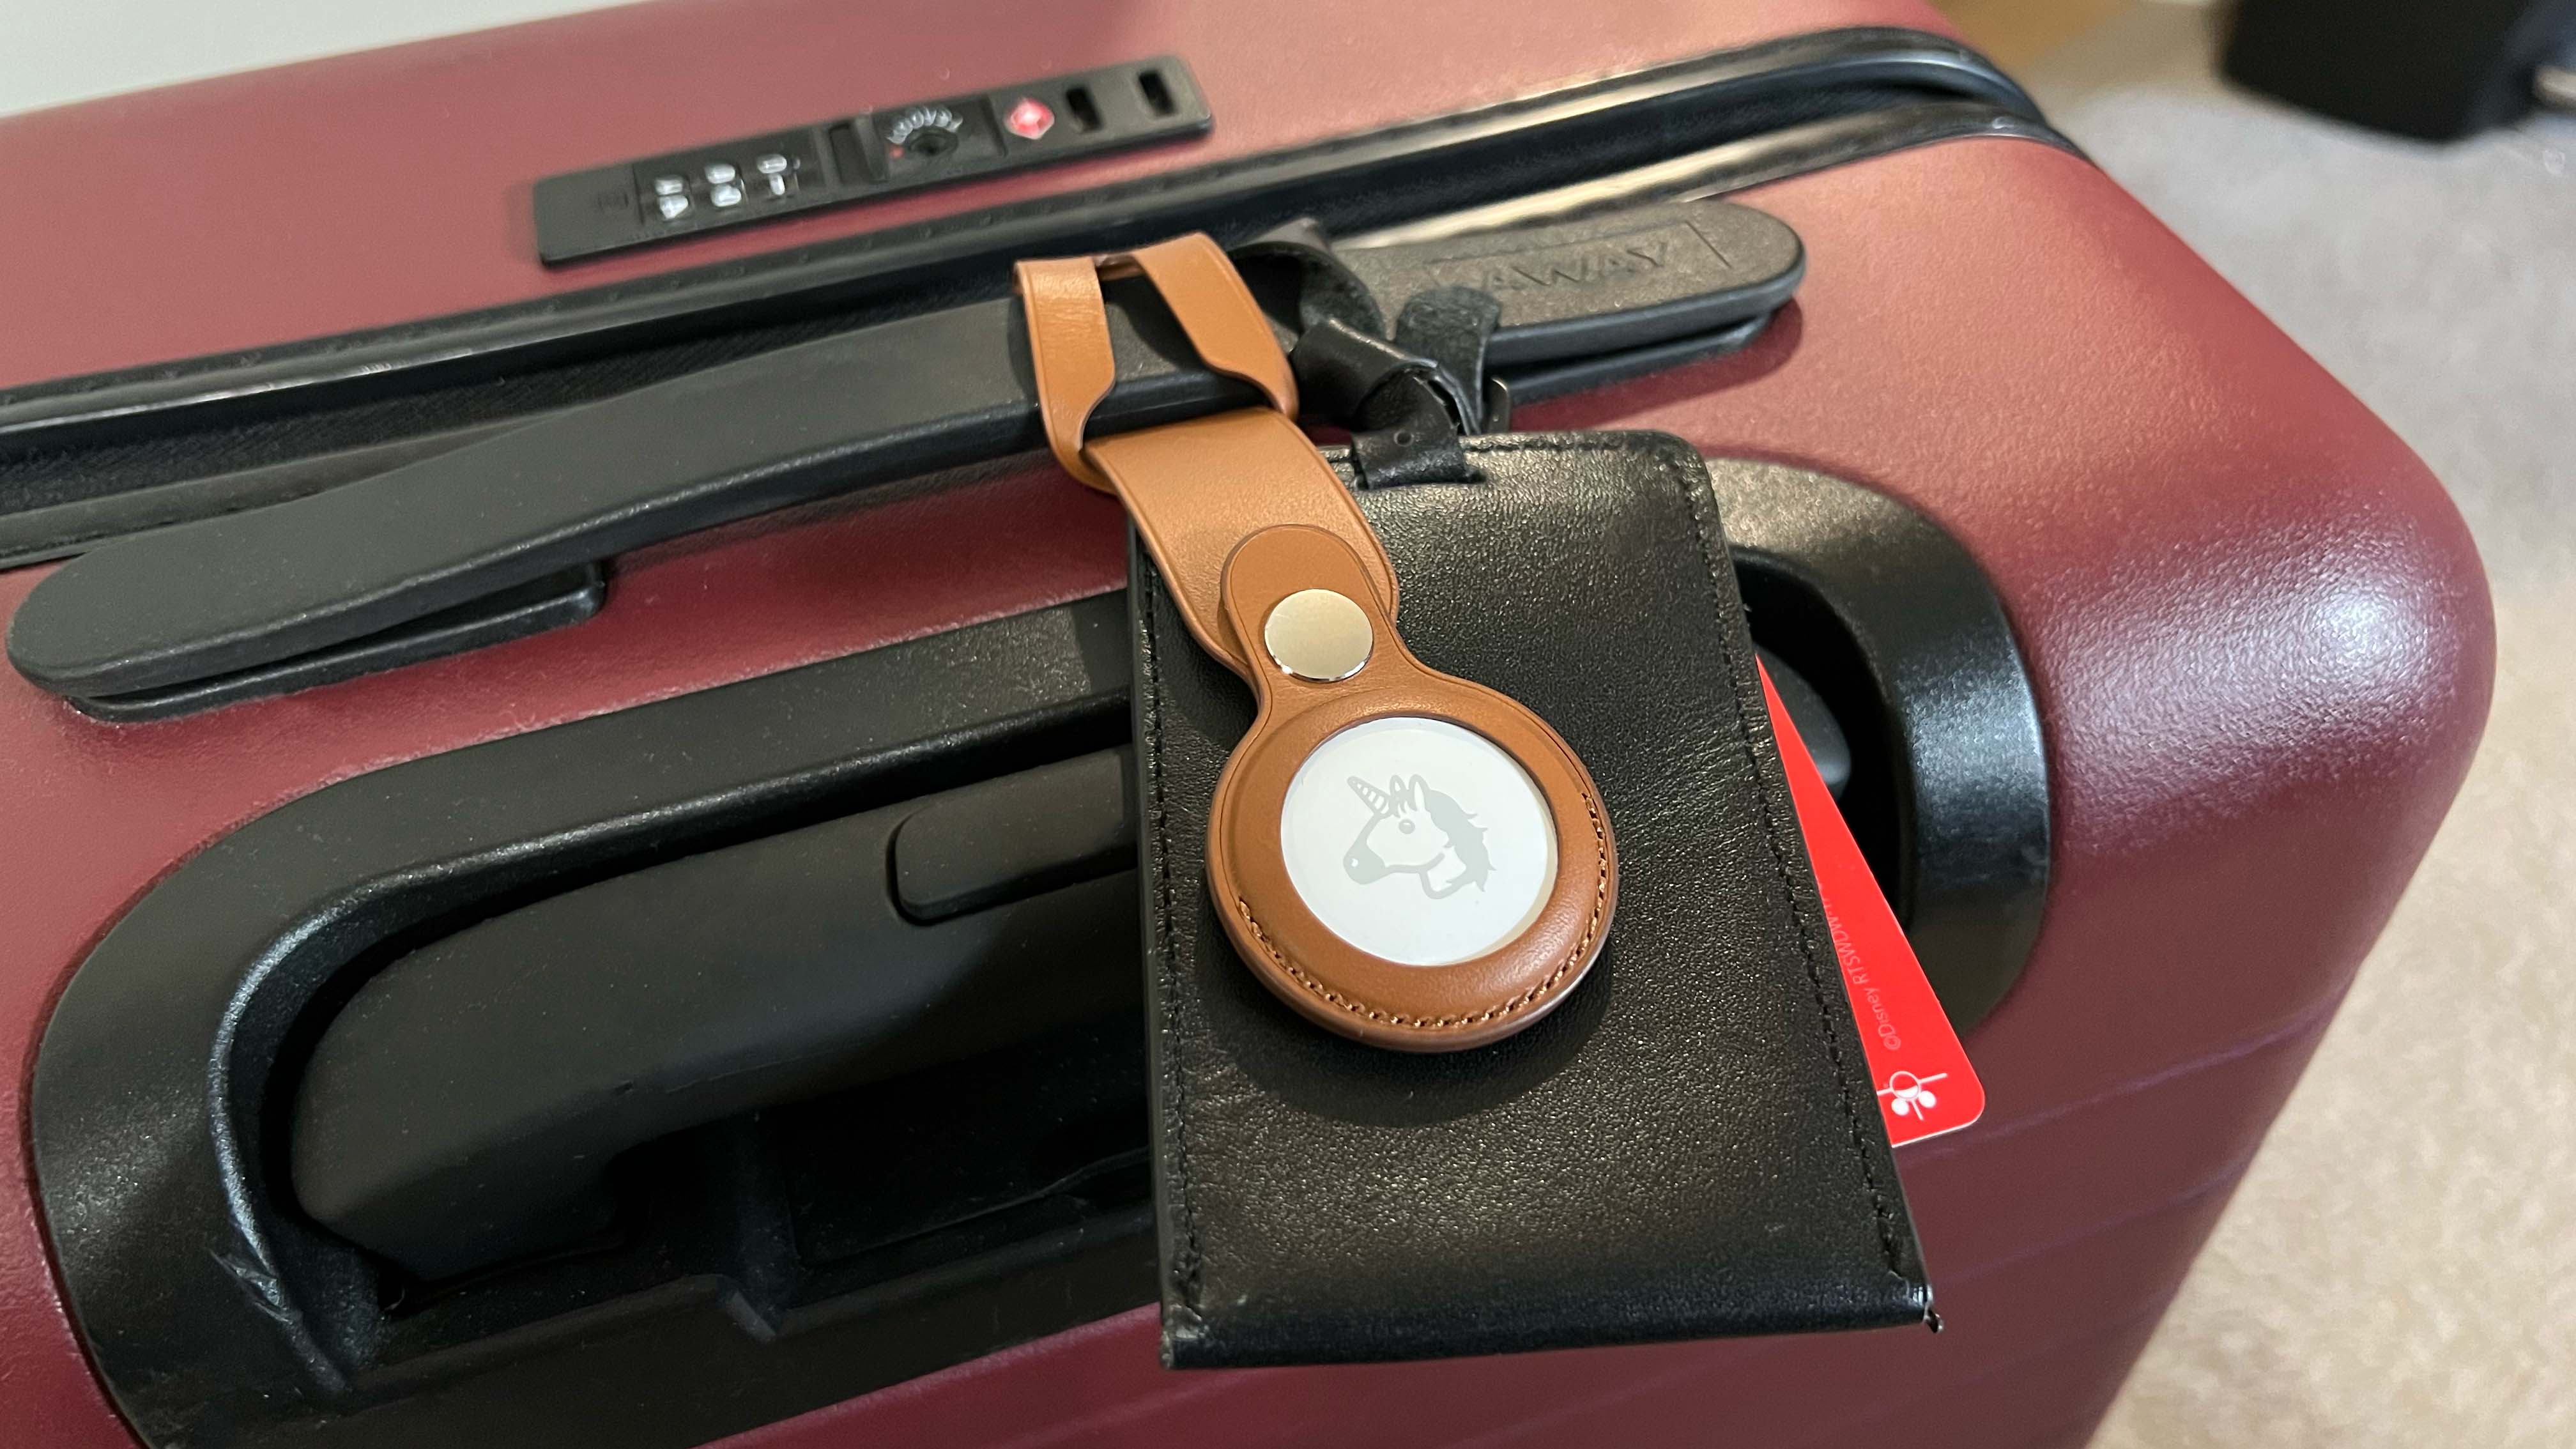 Review: Apple AirTag for tracking airline luggage and checked